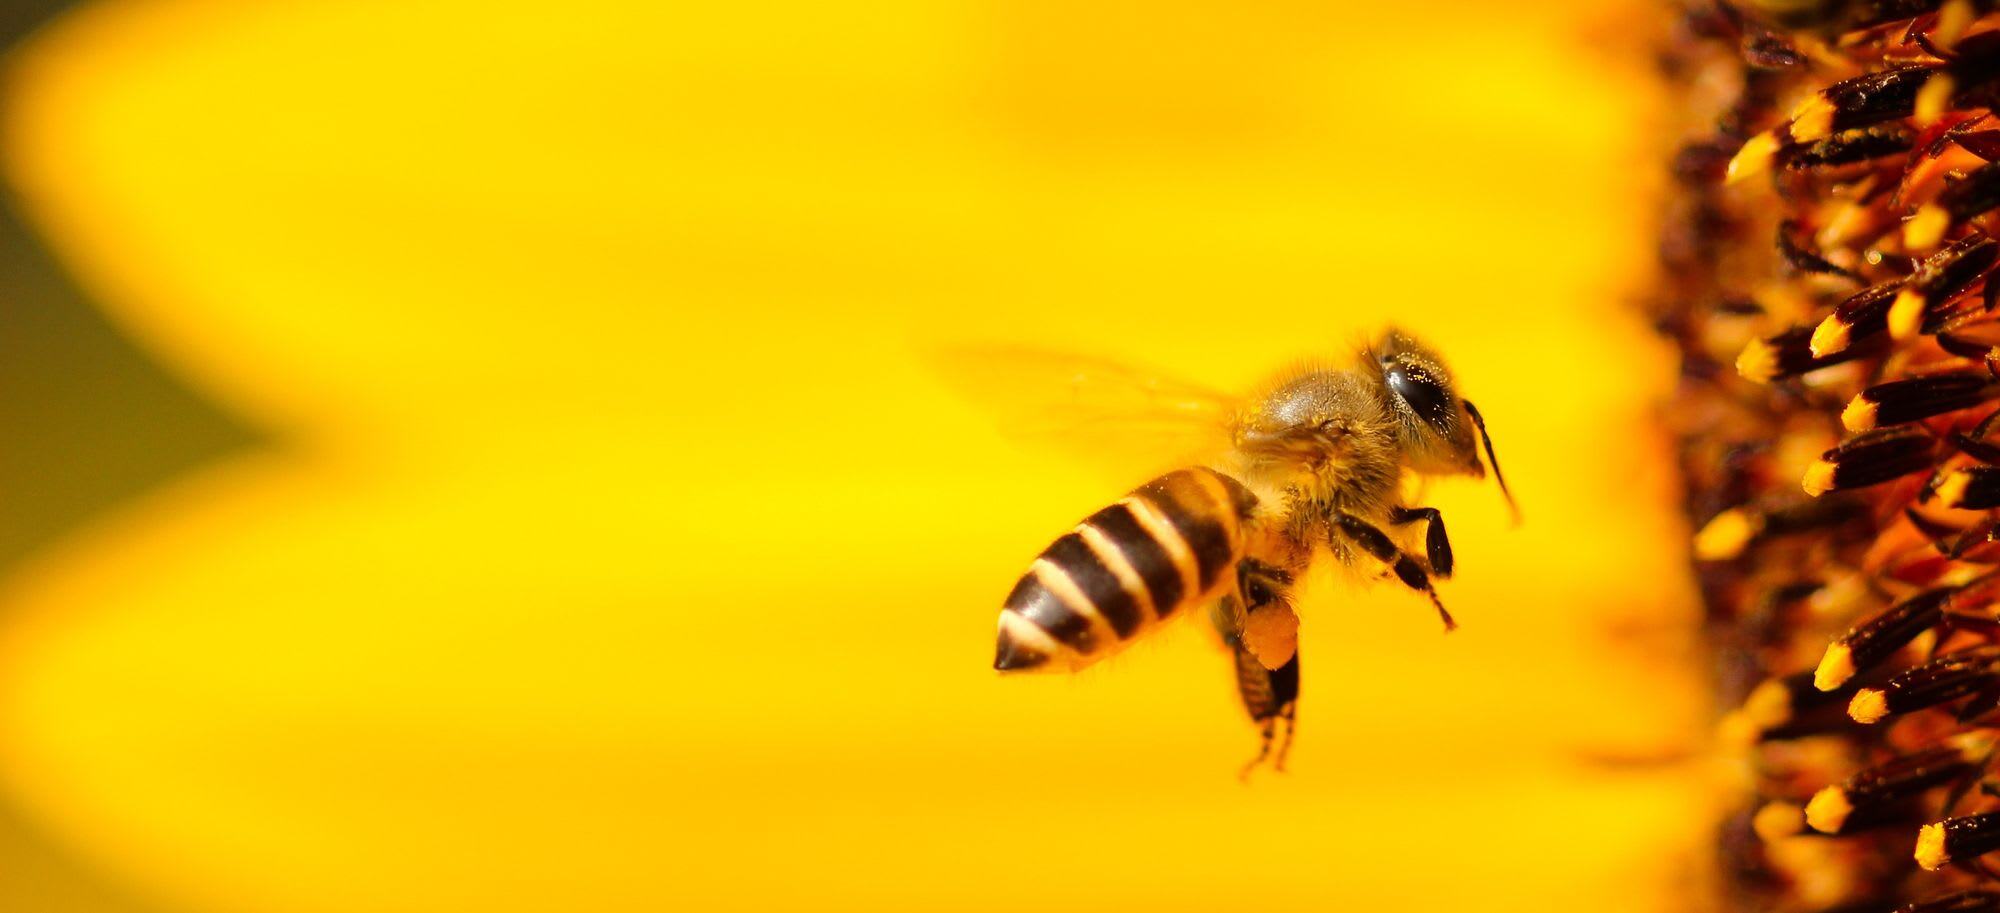 Beyond Programming: an X-Teamer on How to Keep Bees image